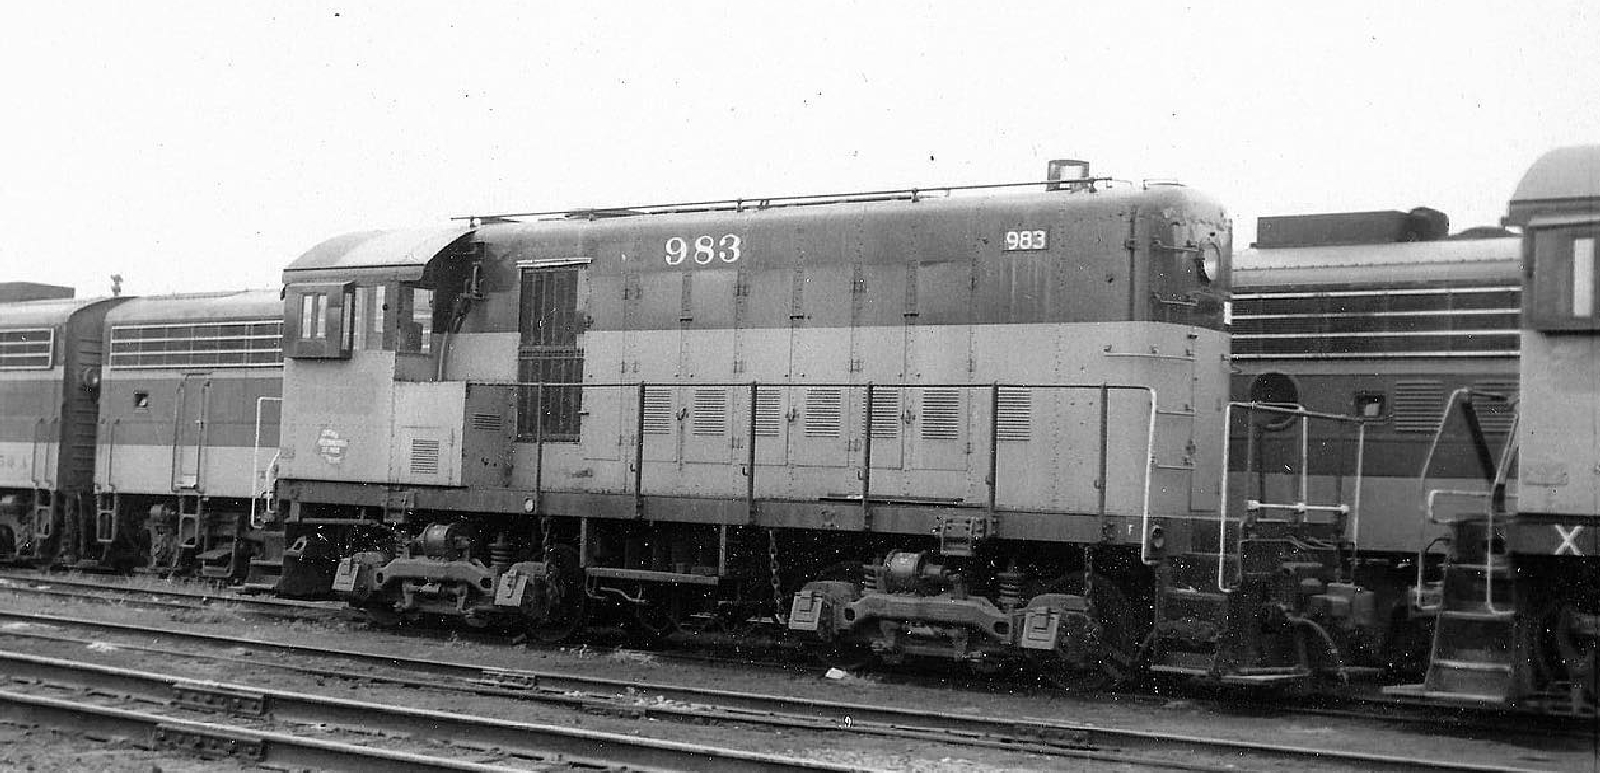 Milwaukee Road HH660 No. 983, which now stands in the Illinois Railway Museum